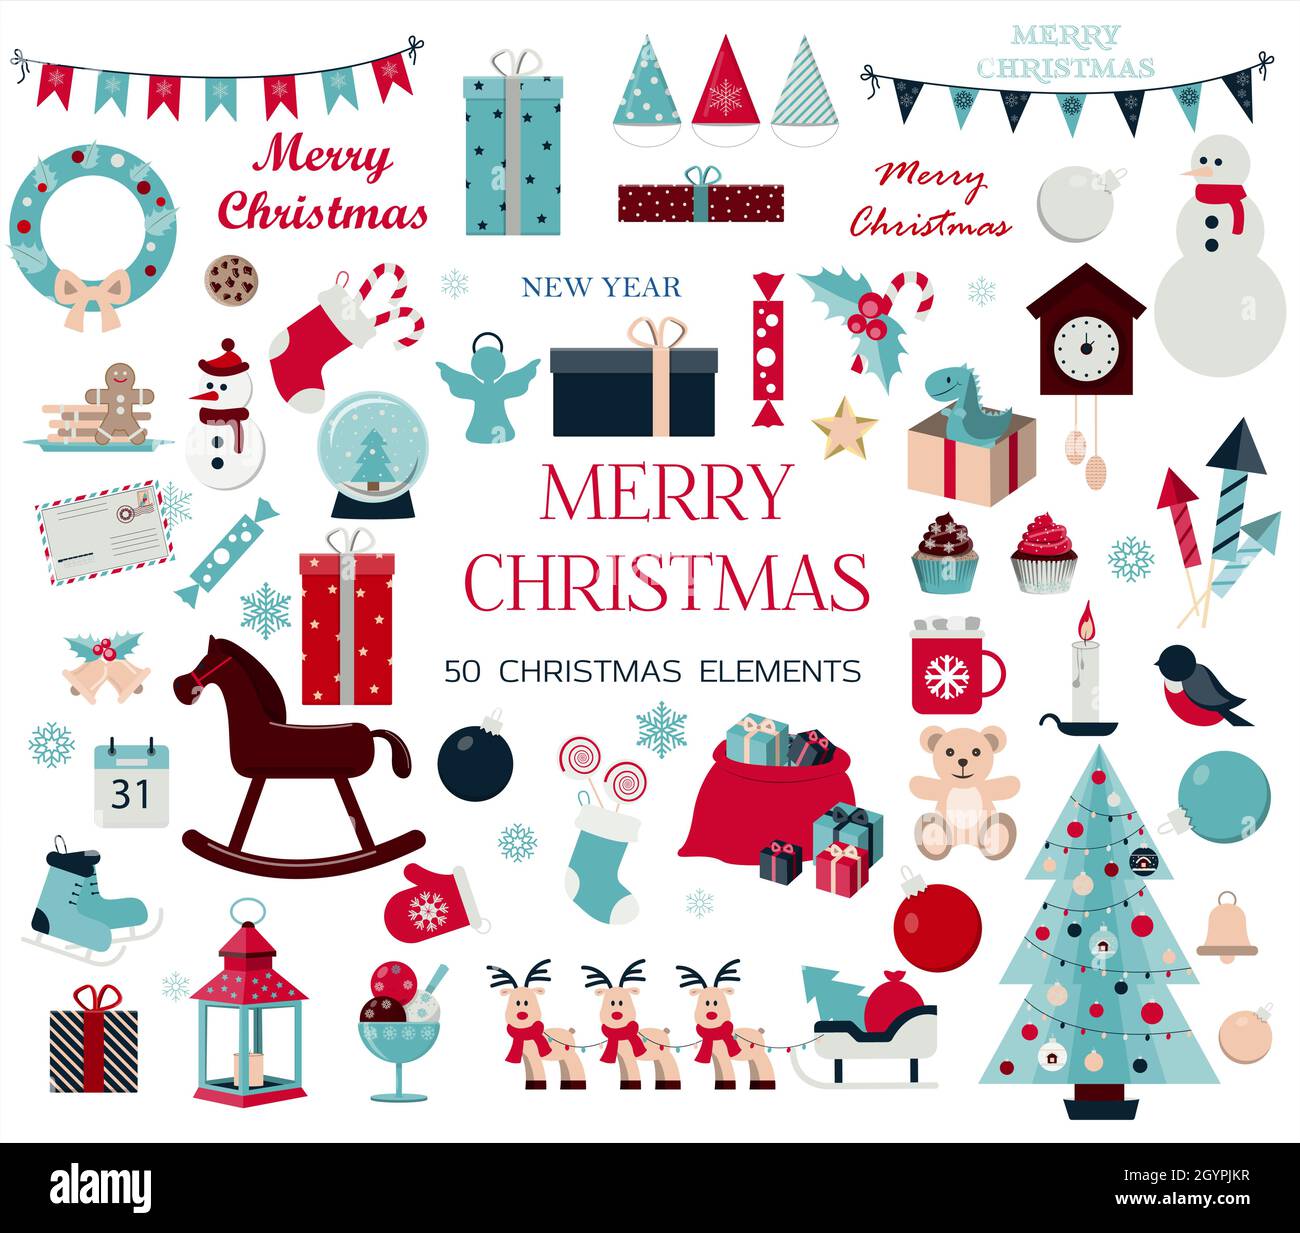 Huge set of Christmas icons and elements. Fifty Christmas images for decorating cards, ads, banners, flyers, and invitations. Cute illustrations in Stock Vector